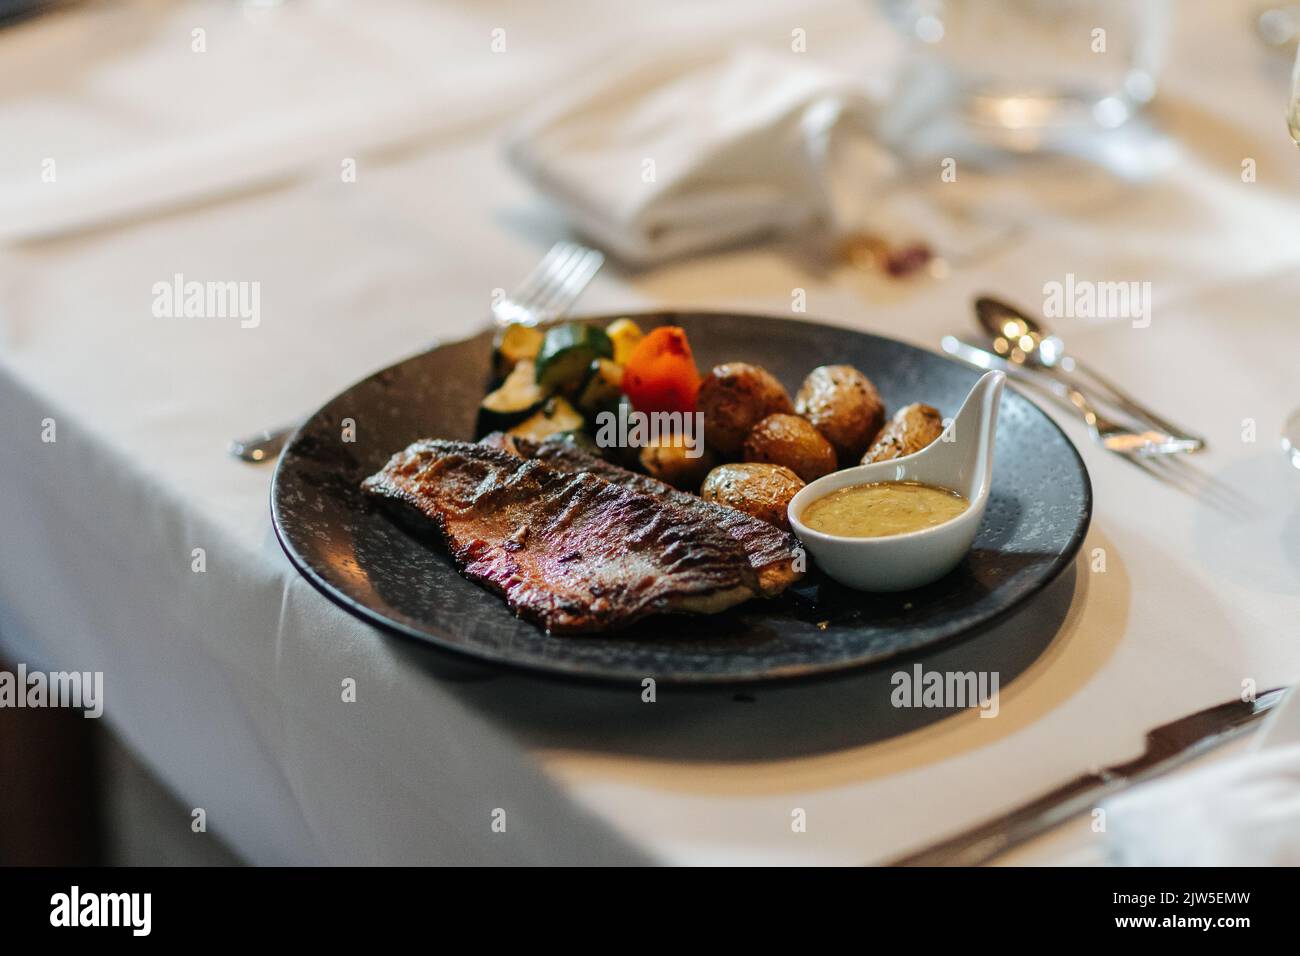 Delicious dinner beautifully arranged on a dinner plate. Stock Photo